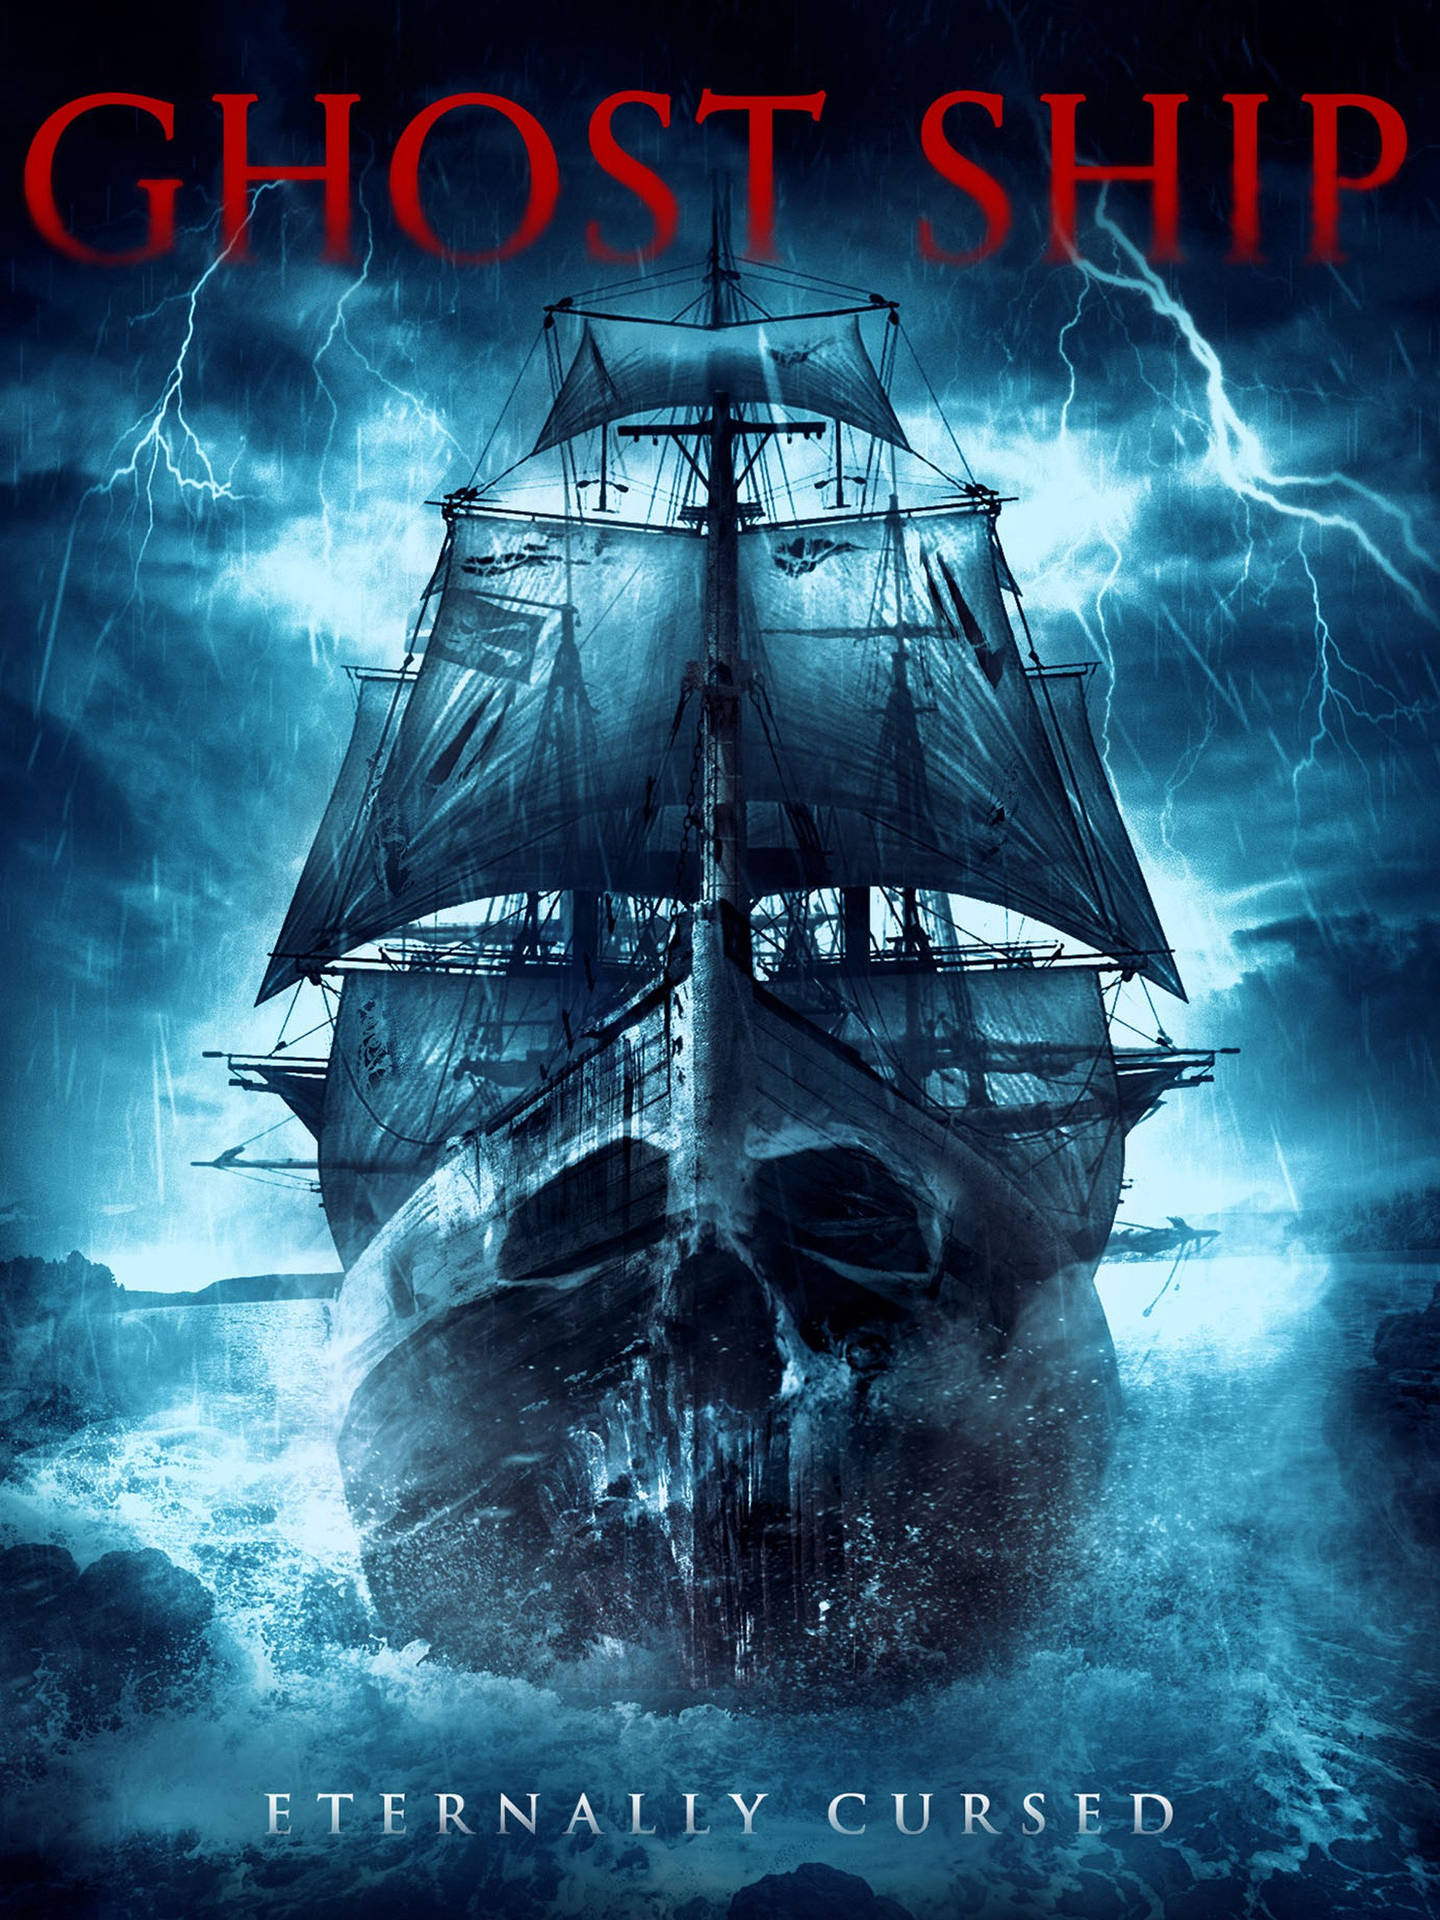 Ghost Ship Movie Poster Wallpaper